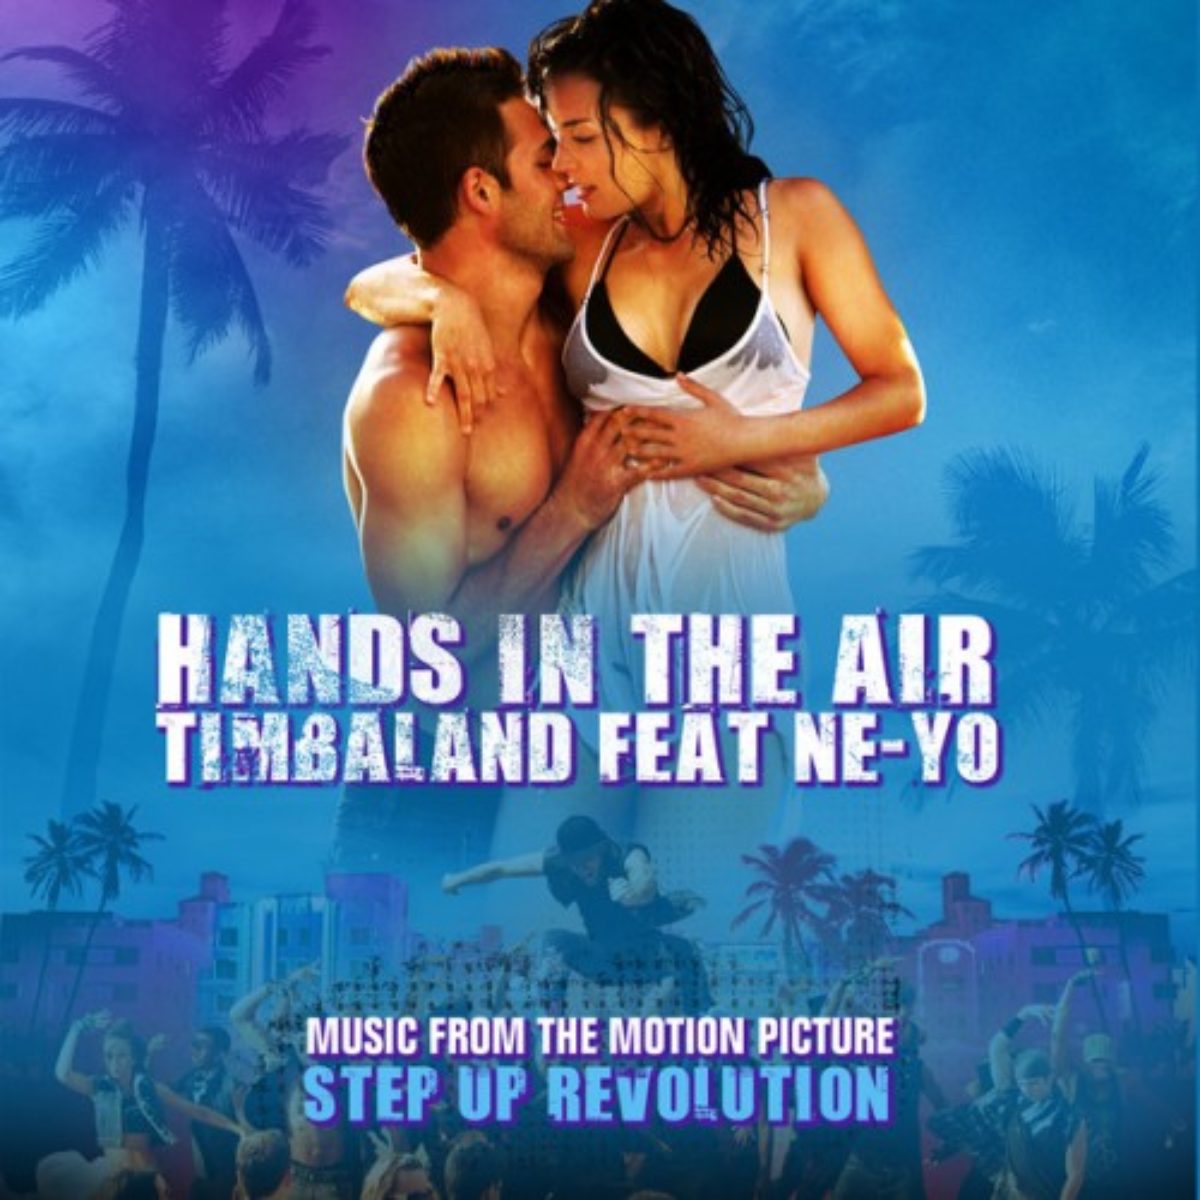 Аир песня. Timbaland hands in the Air. Шаг вперед. Step up Revolution (Music from the Motion picture). 8 Ball hands in the Air.